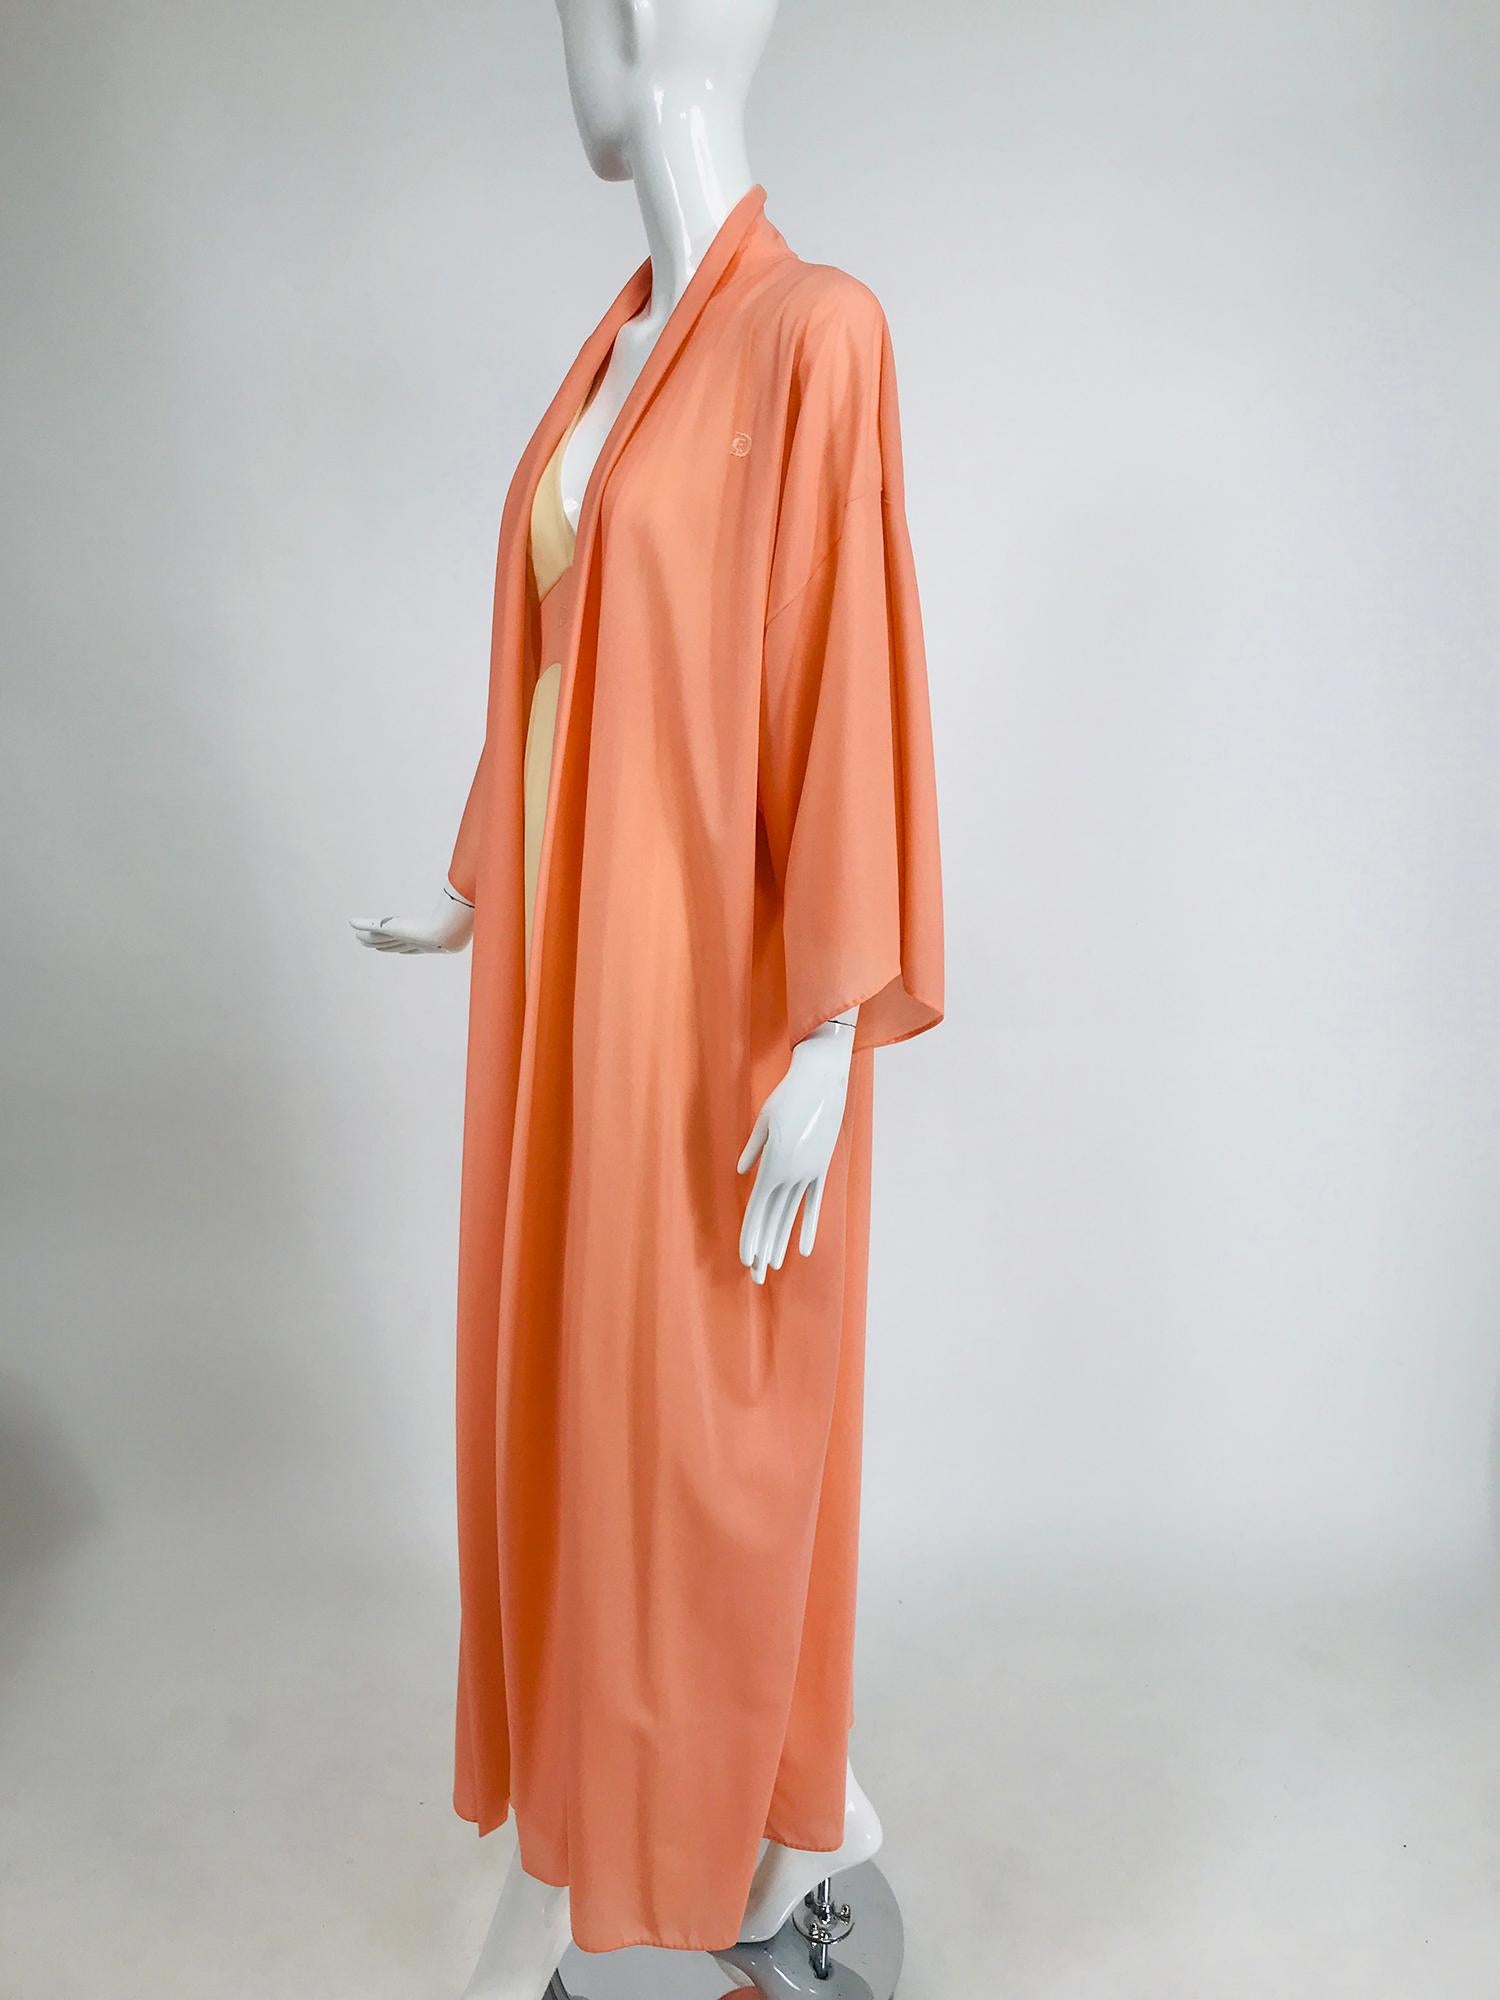 Emilio Pucci for Formfit Rogers 2pc. Sheer Peignoir Robe & Gown 1970s 1